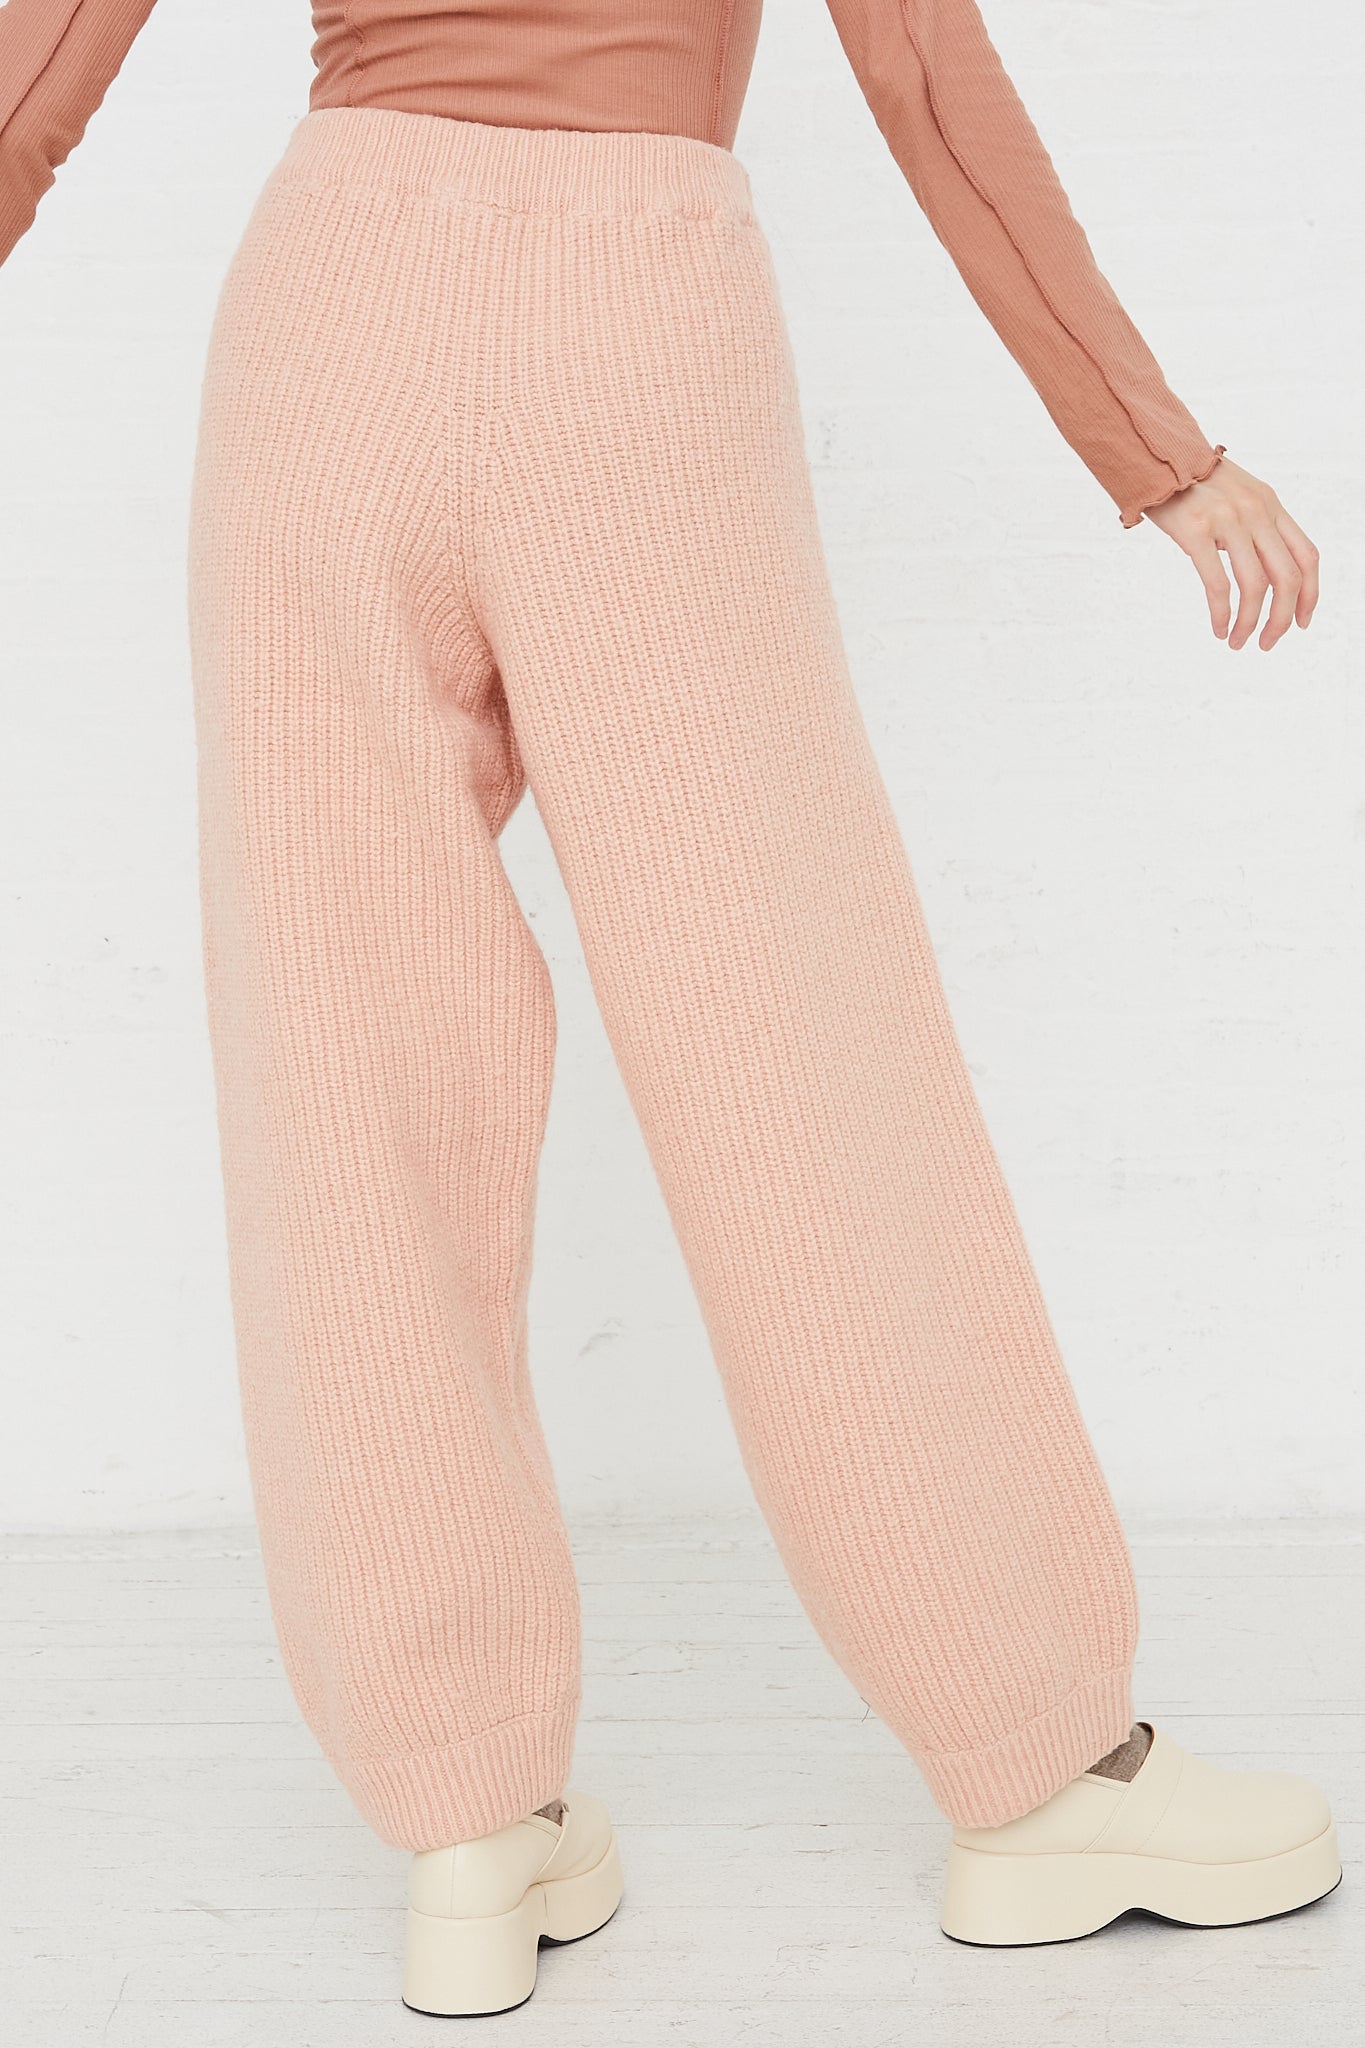 Mea Rib Knit Pant in Pink by Baserange for Oroboro Back